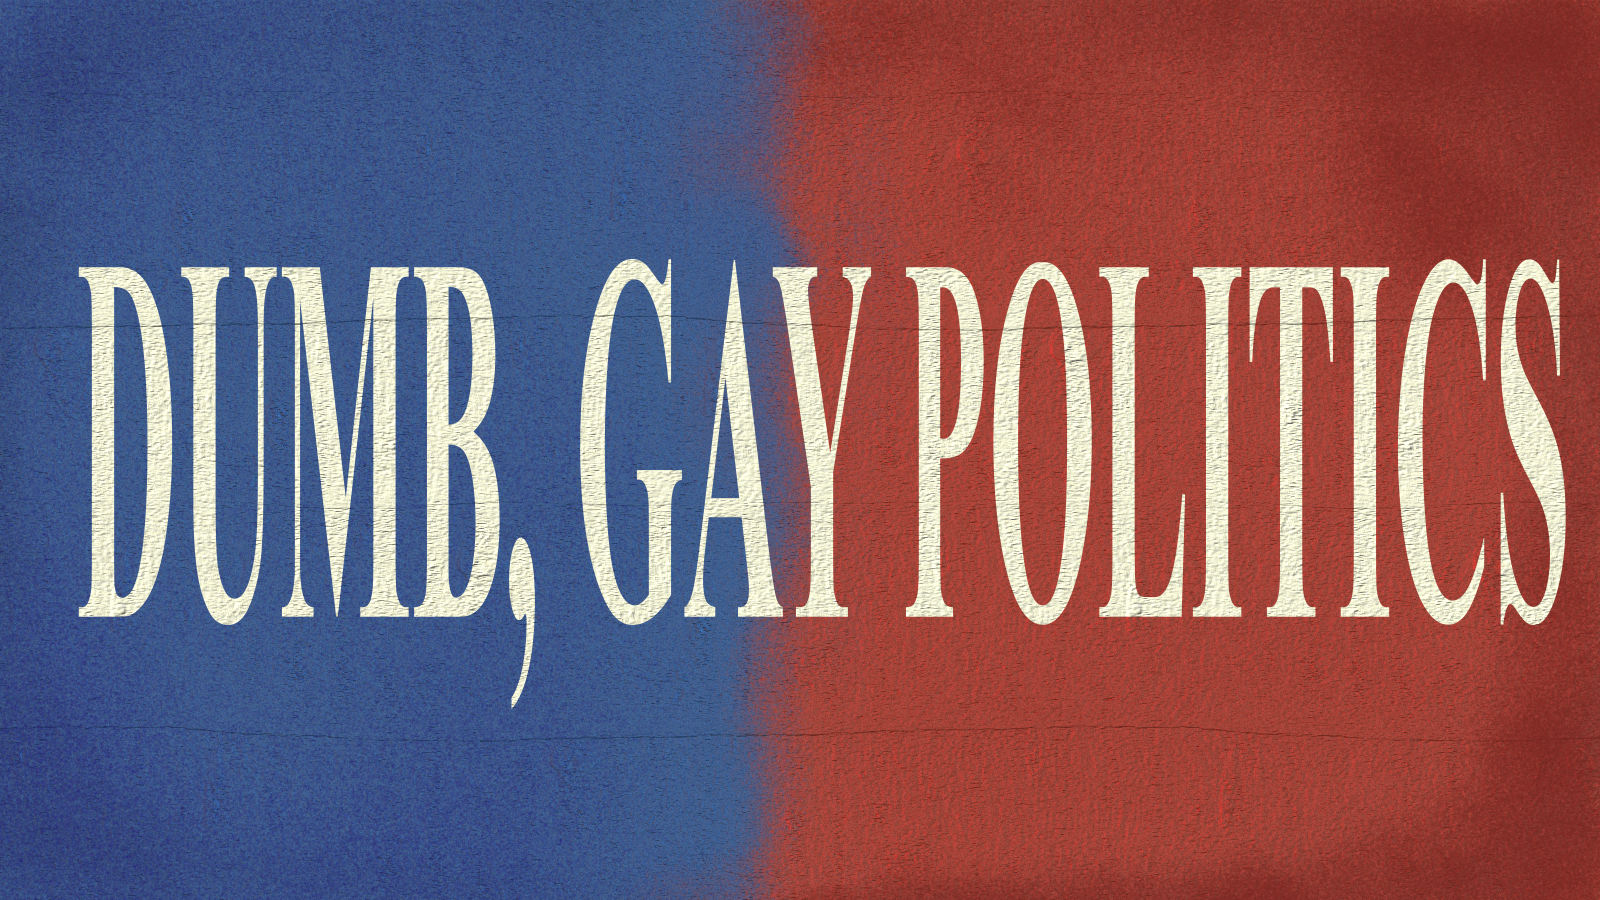 Back drop, half blue and half red on a concrete texture. “DUMB, GAY POLITICS” in peach letters is centered on the image.